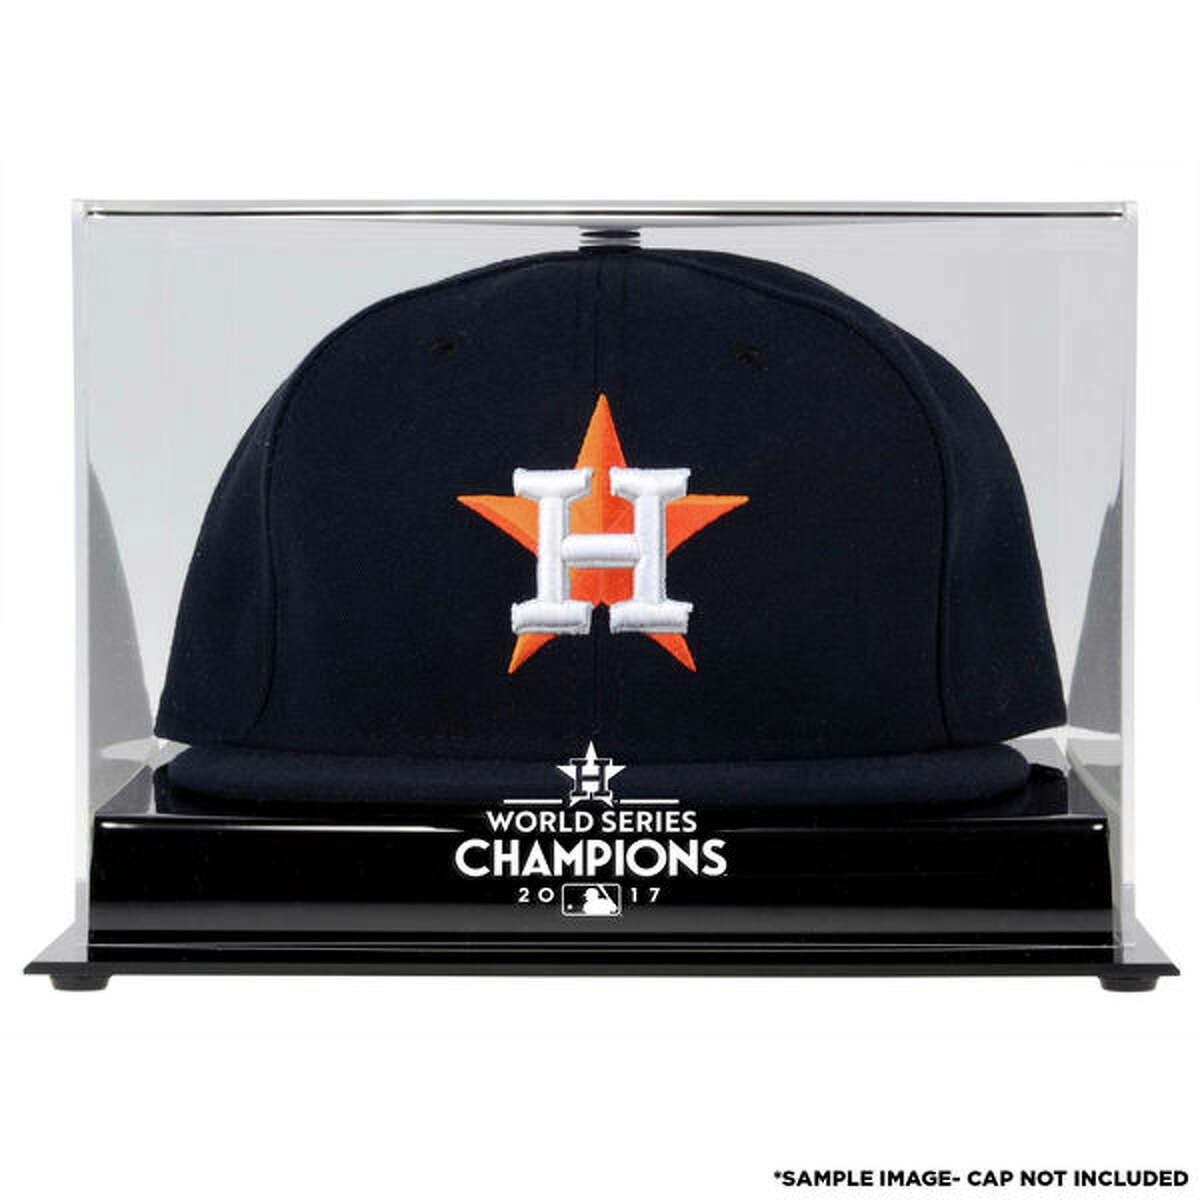 Houston Astros Baby Shirt, Space City Astros Gift For Astros Fans - Bring  Your Ideas, Thoughts And Imaginations Into Reality Today